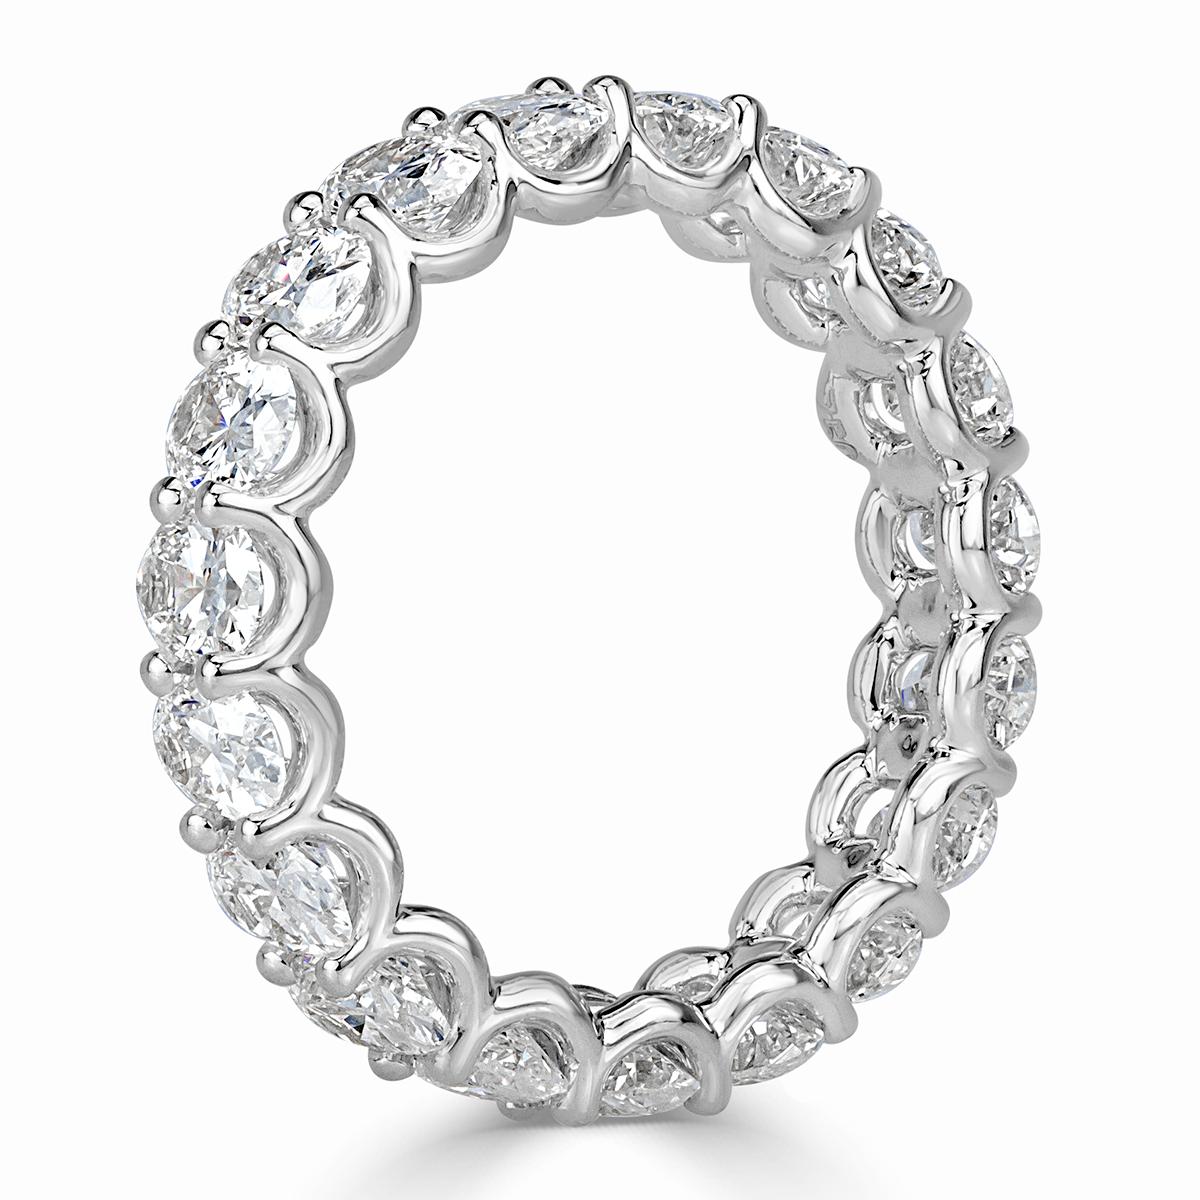 This remarkable diamond eternity band features 3.70ct of oval cut diamonds hand set in a platinum u-prong style setting. The diamonds are graded at E-F, VS1-VS2. All eternity bands are shown in a size 6.5. We custom craft each eternity band and will